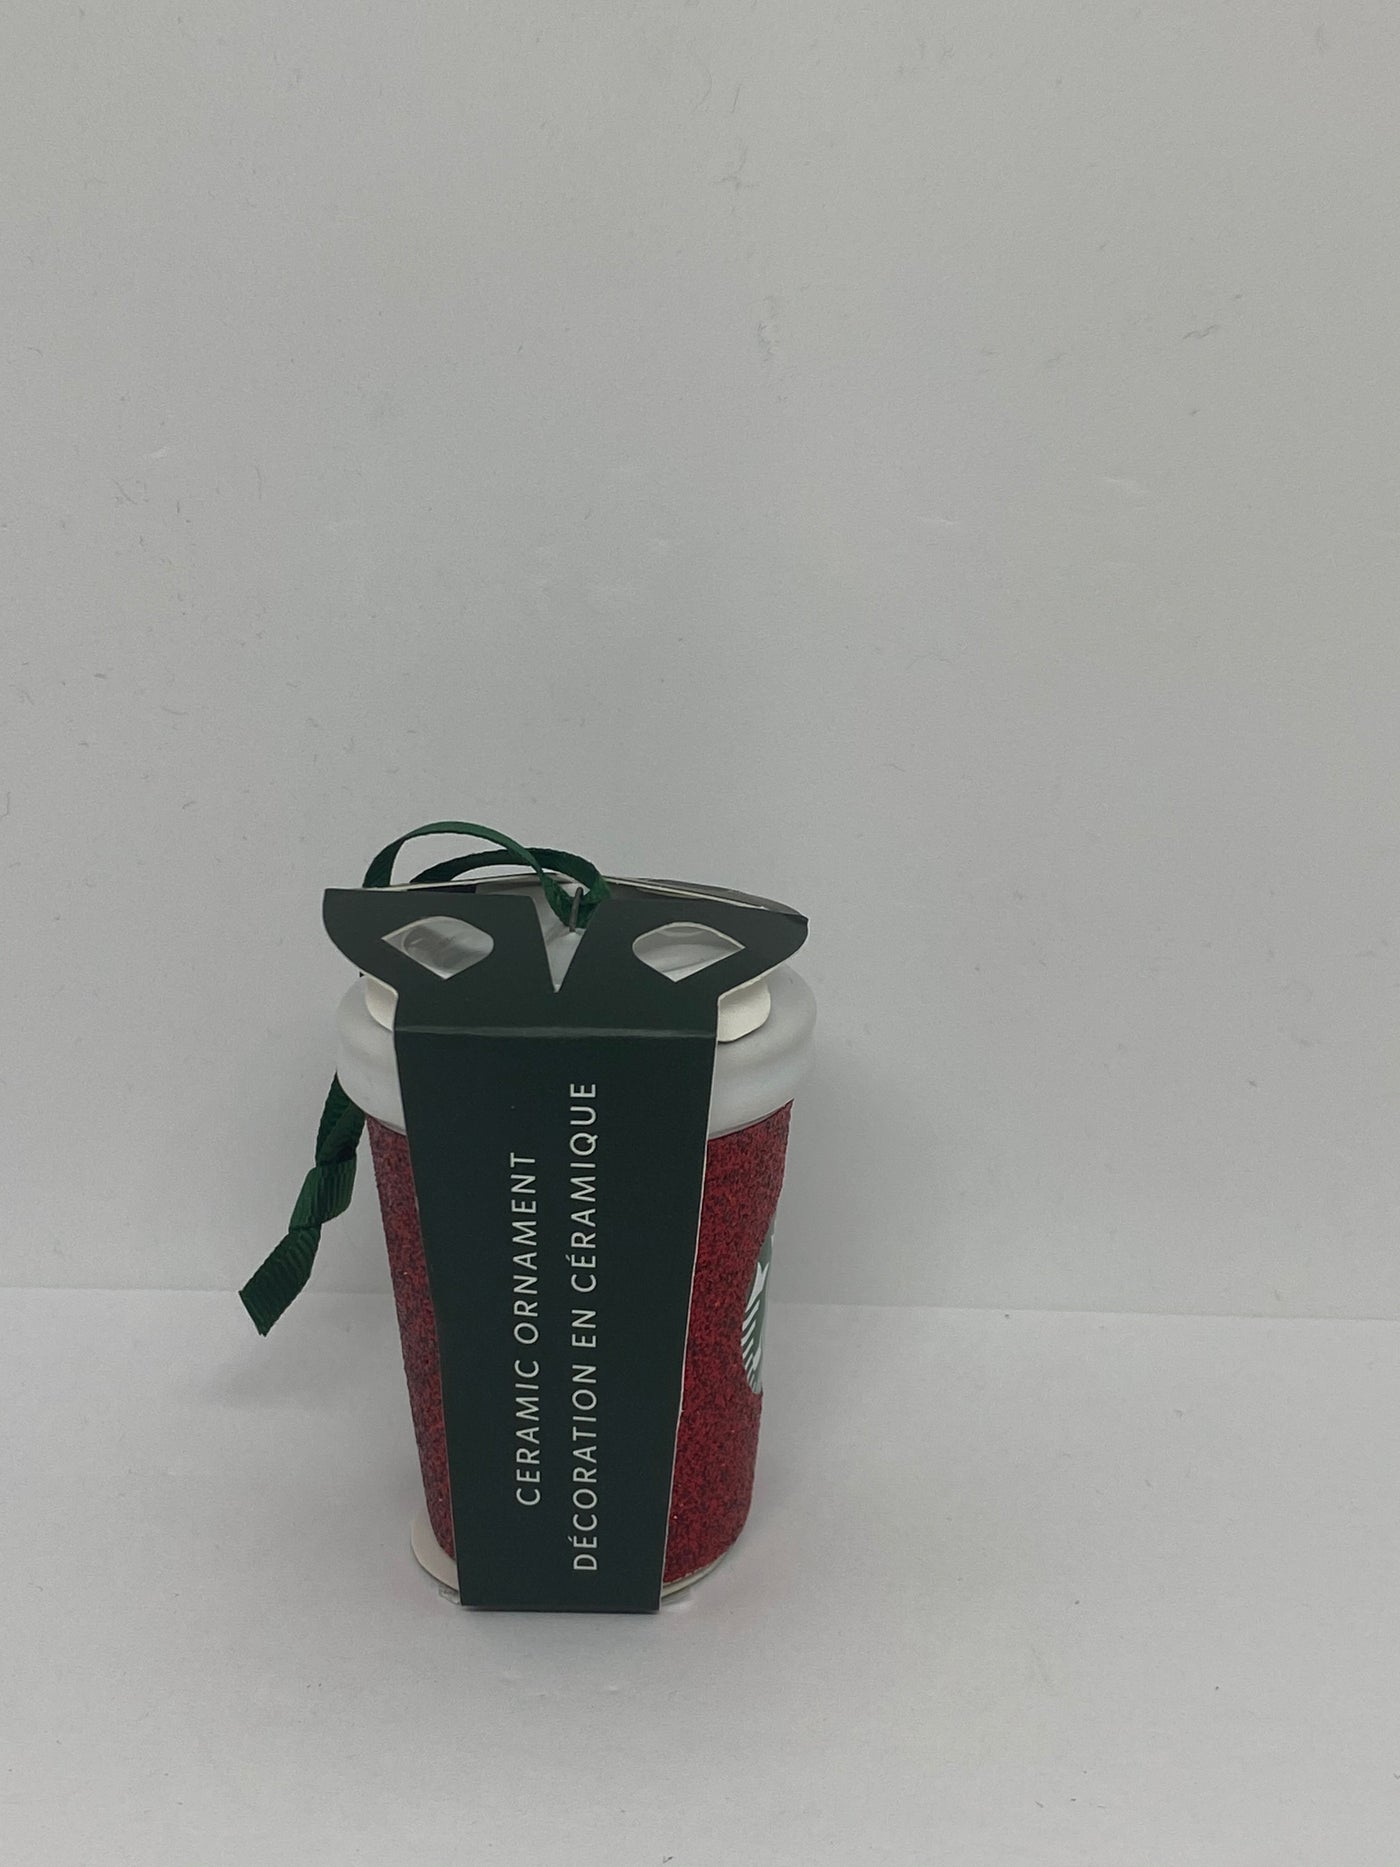 Starbucks Red Glitter Tumbler Ceramic Christmas Ornament New with Tag